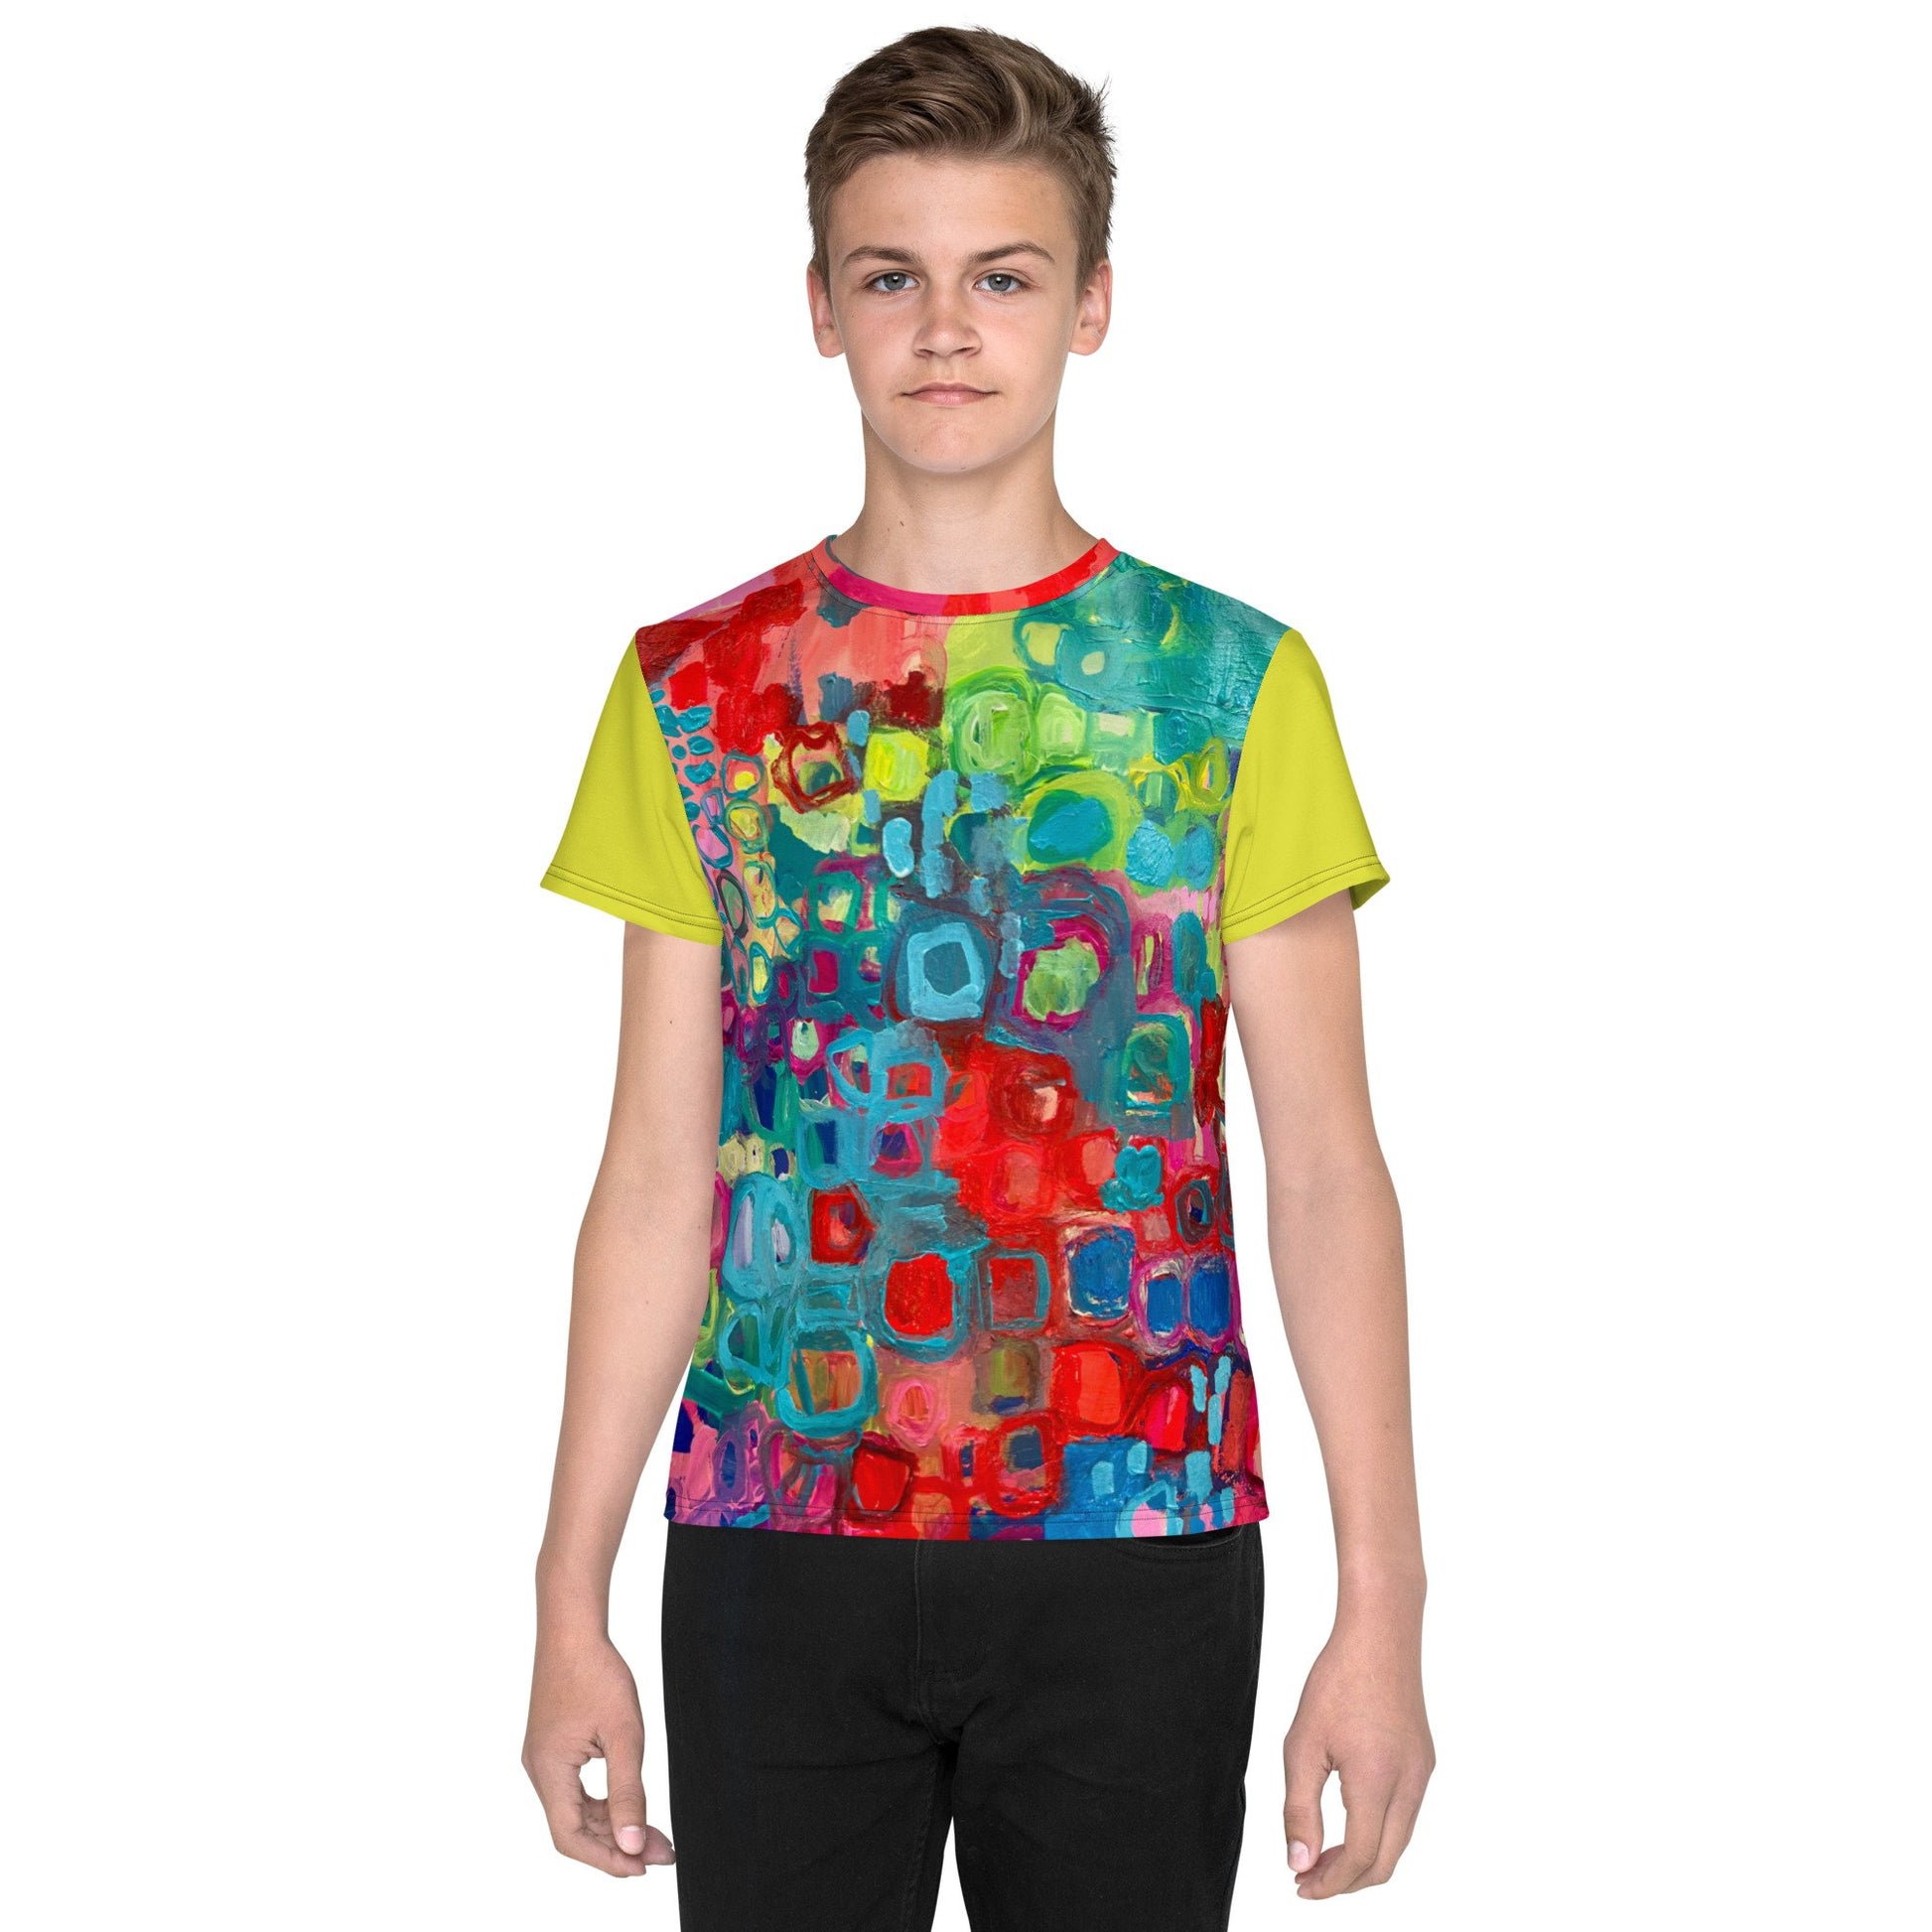 Vibrancy for Your Life - Youth crew neck t-shirt